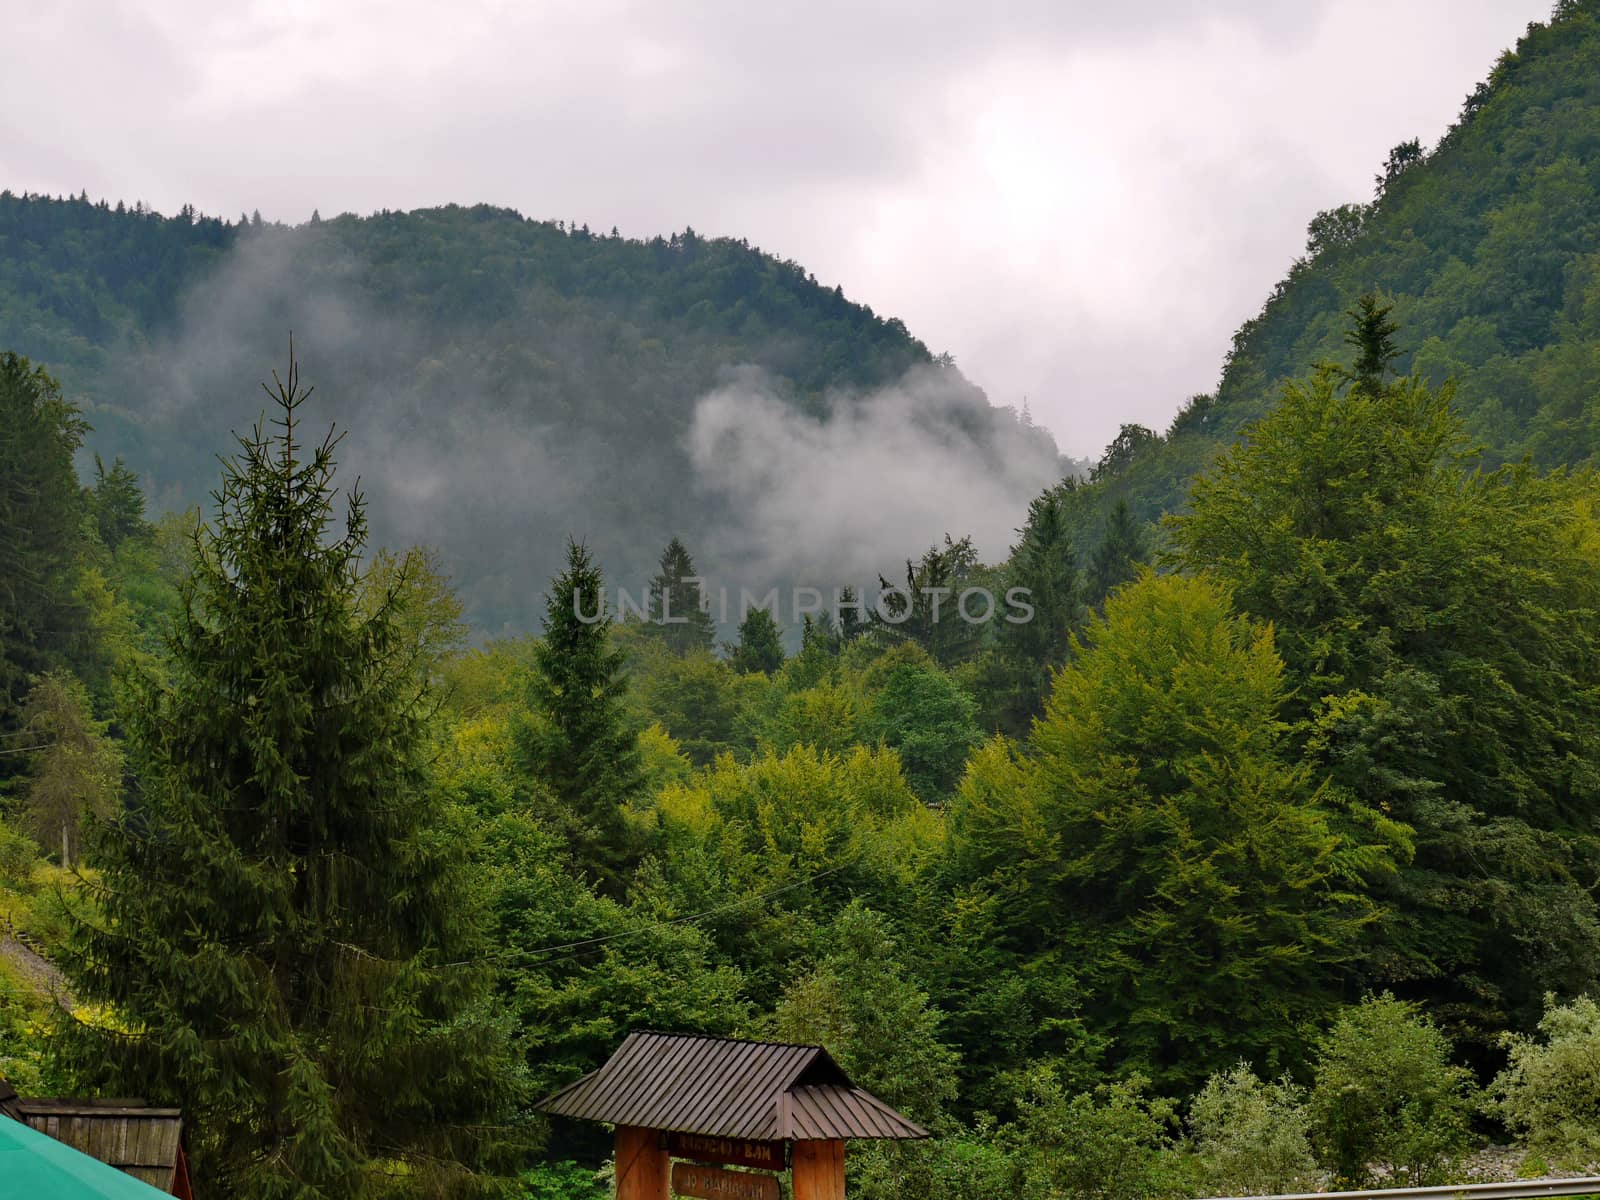 Mountain peaks in the haze of mist and the roof of the well at their foothills by Adamchuk